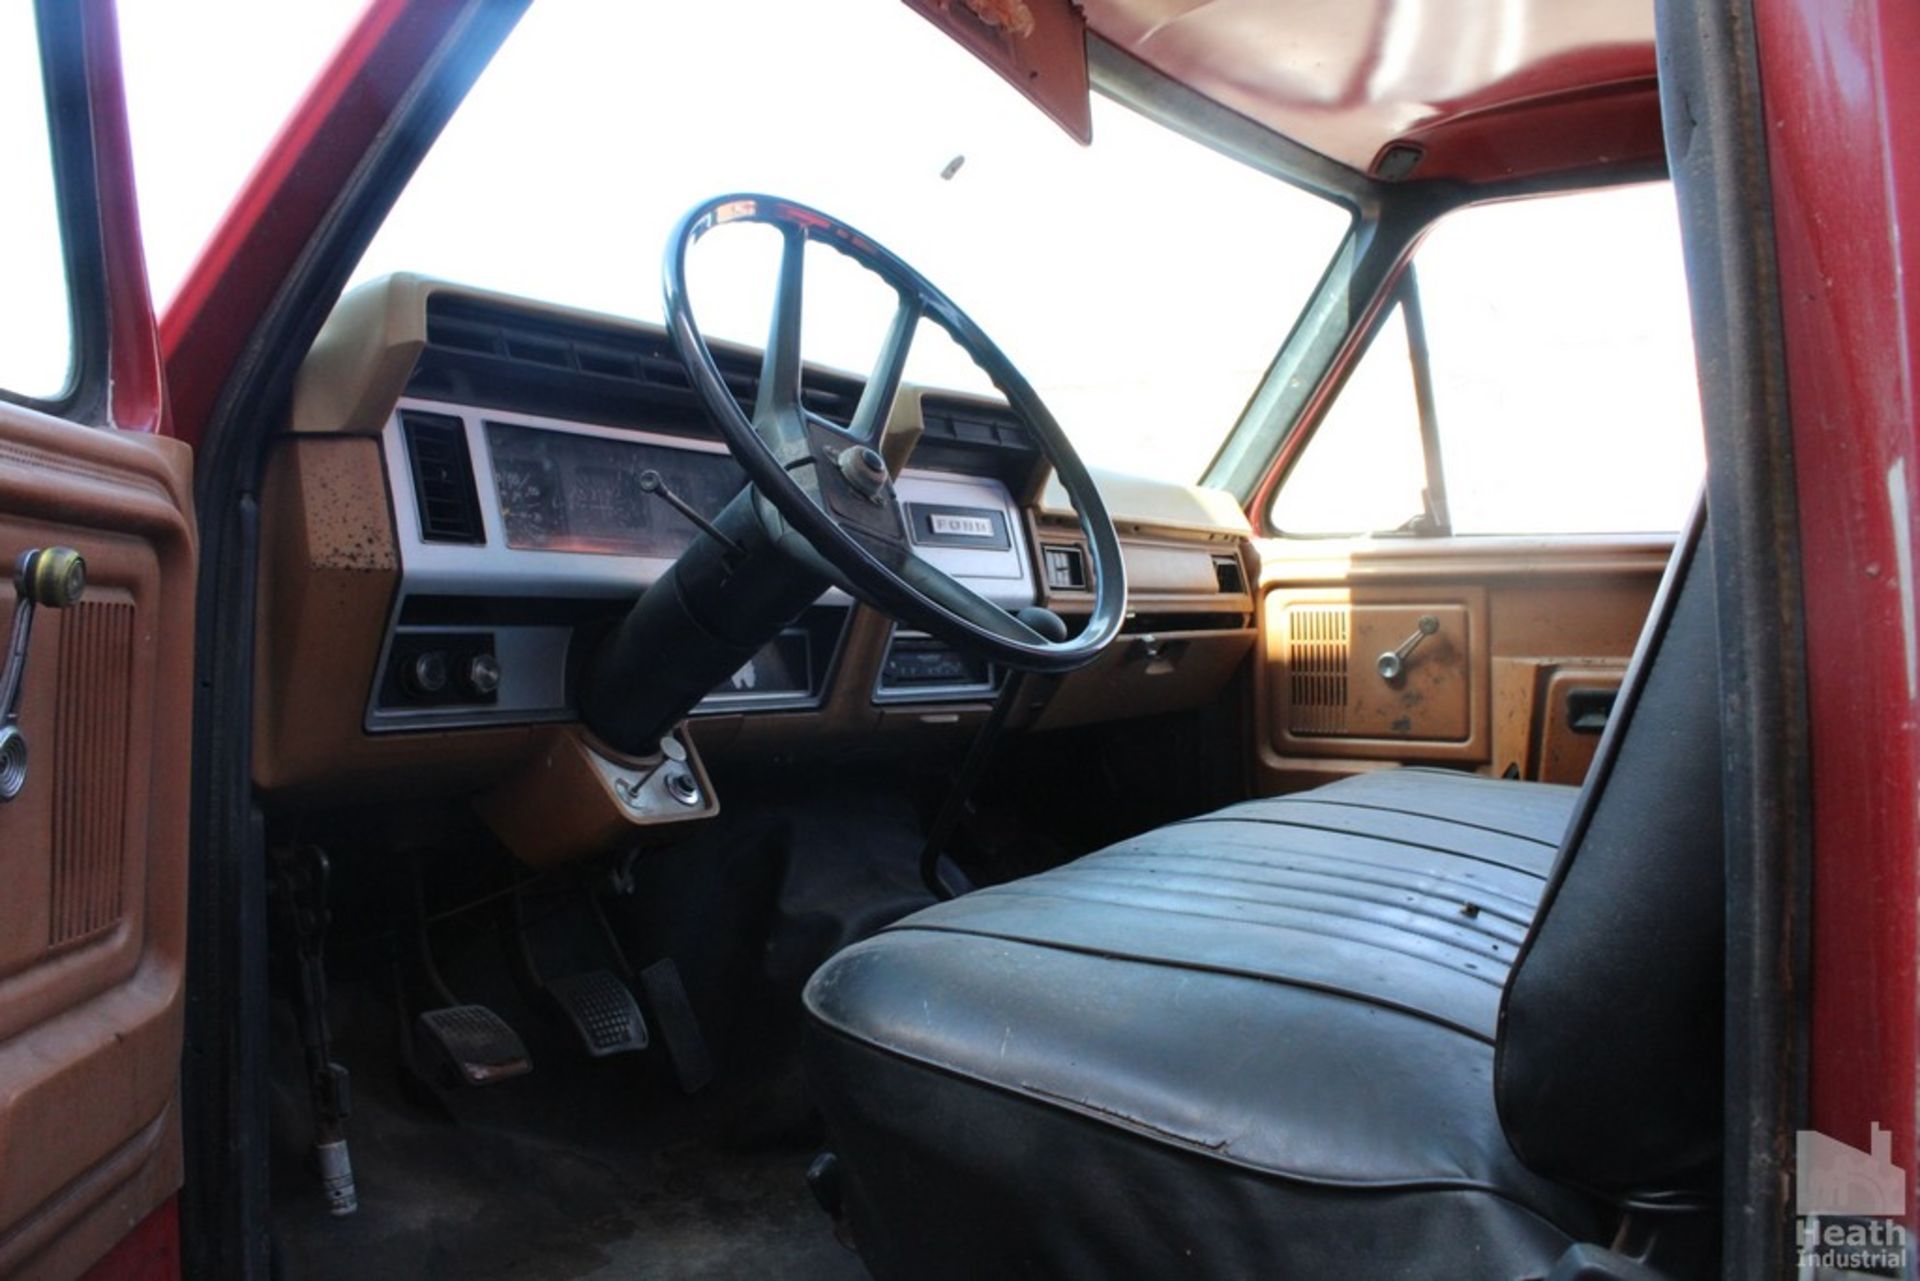 1980 FORD MODEL F700 STAKE TRUCK, VIN F70HVGH0858, AUTOMATIC TRANSMISSION, 16' STEEL DECK WITH - Image 4 of 7